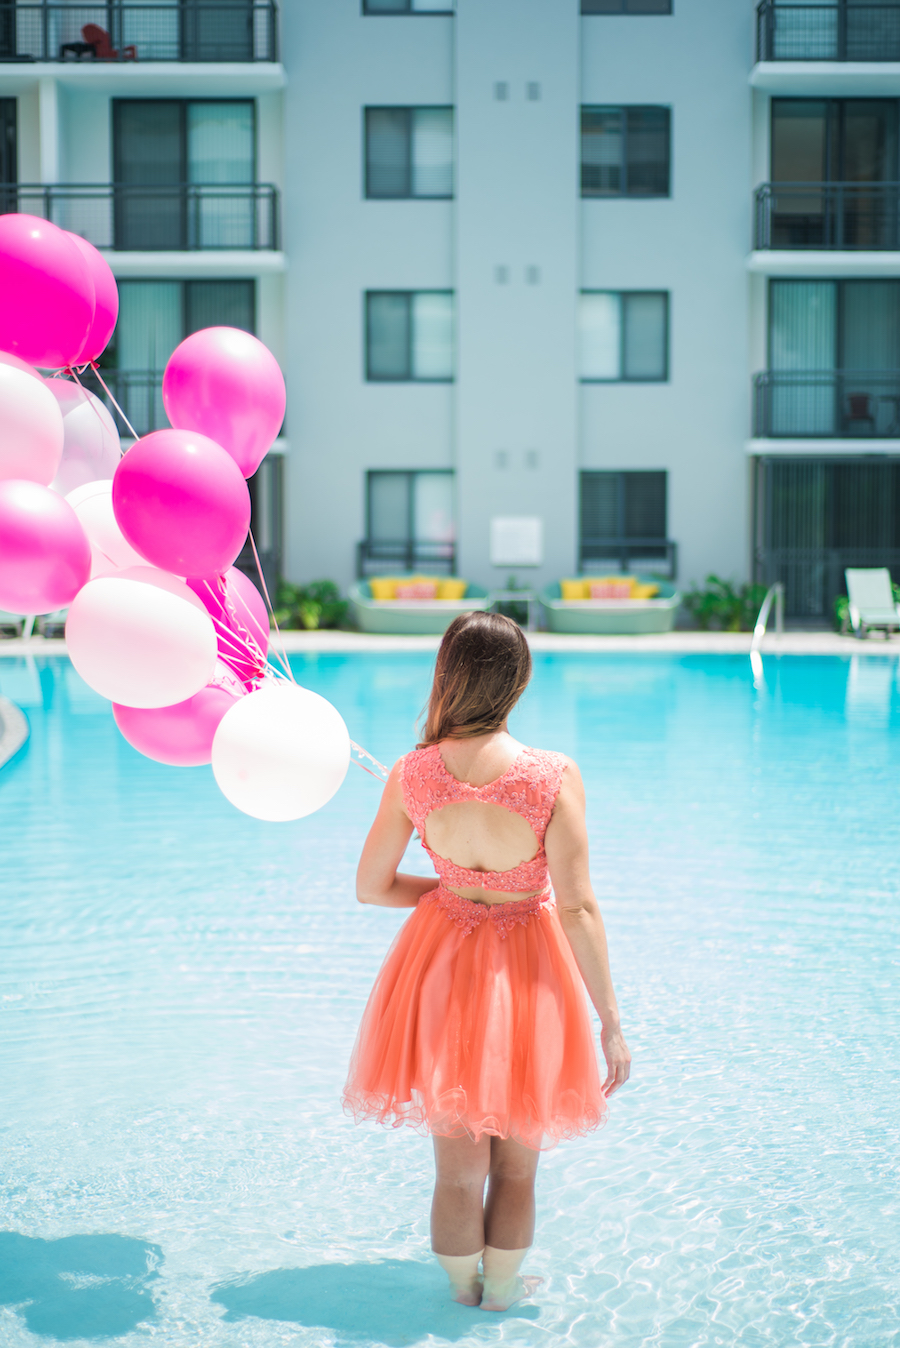 Pink Birthday Party Dress from Lending Luxury with Balloons in Pool | Modern Colorful Birthday Party Inspiration and Decor | Tampa Bay Portrait and Wedding Photographer Kera Photography